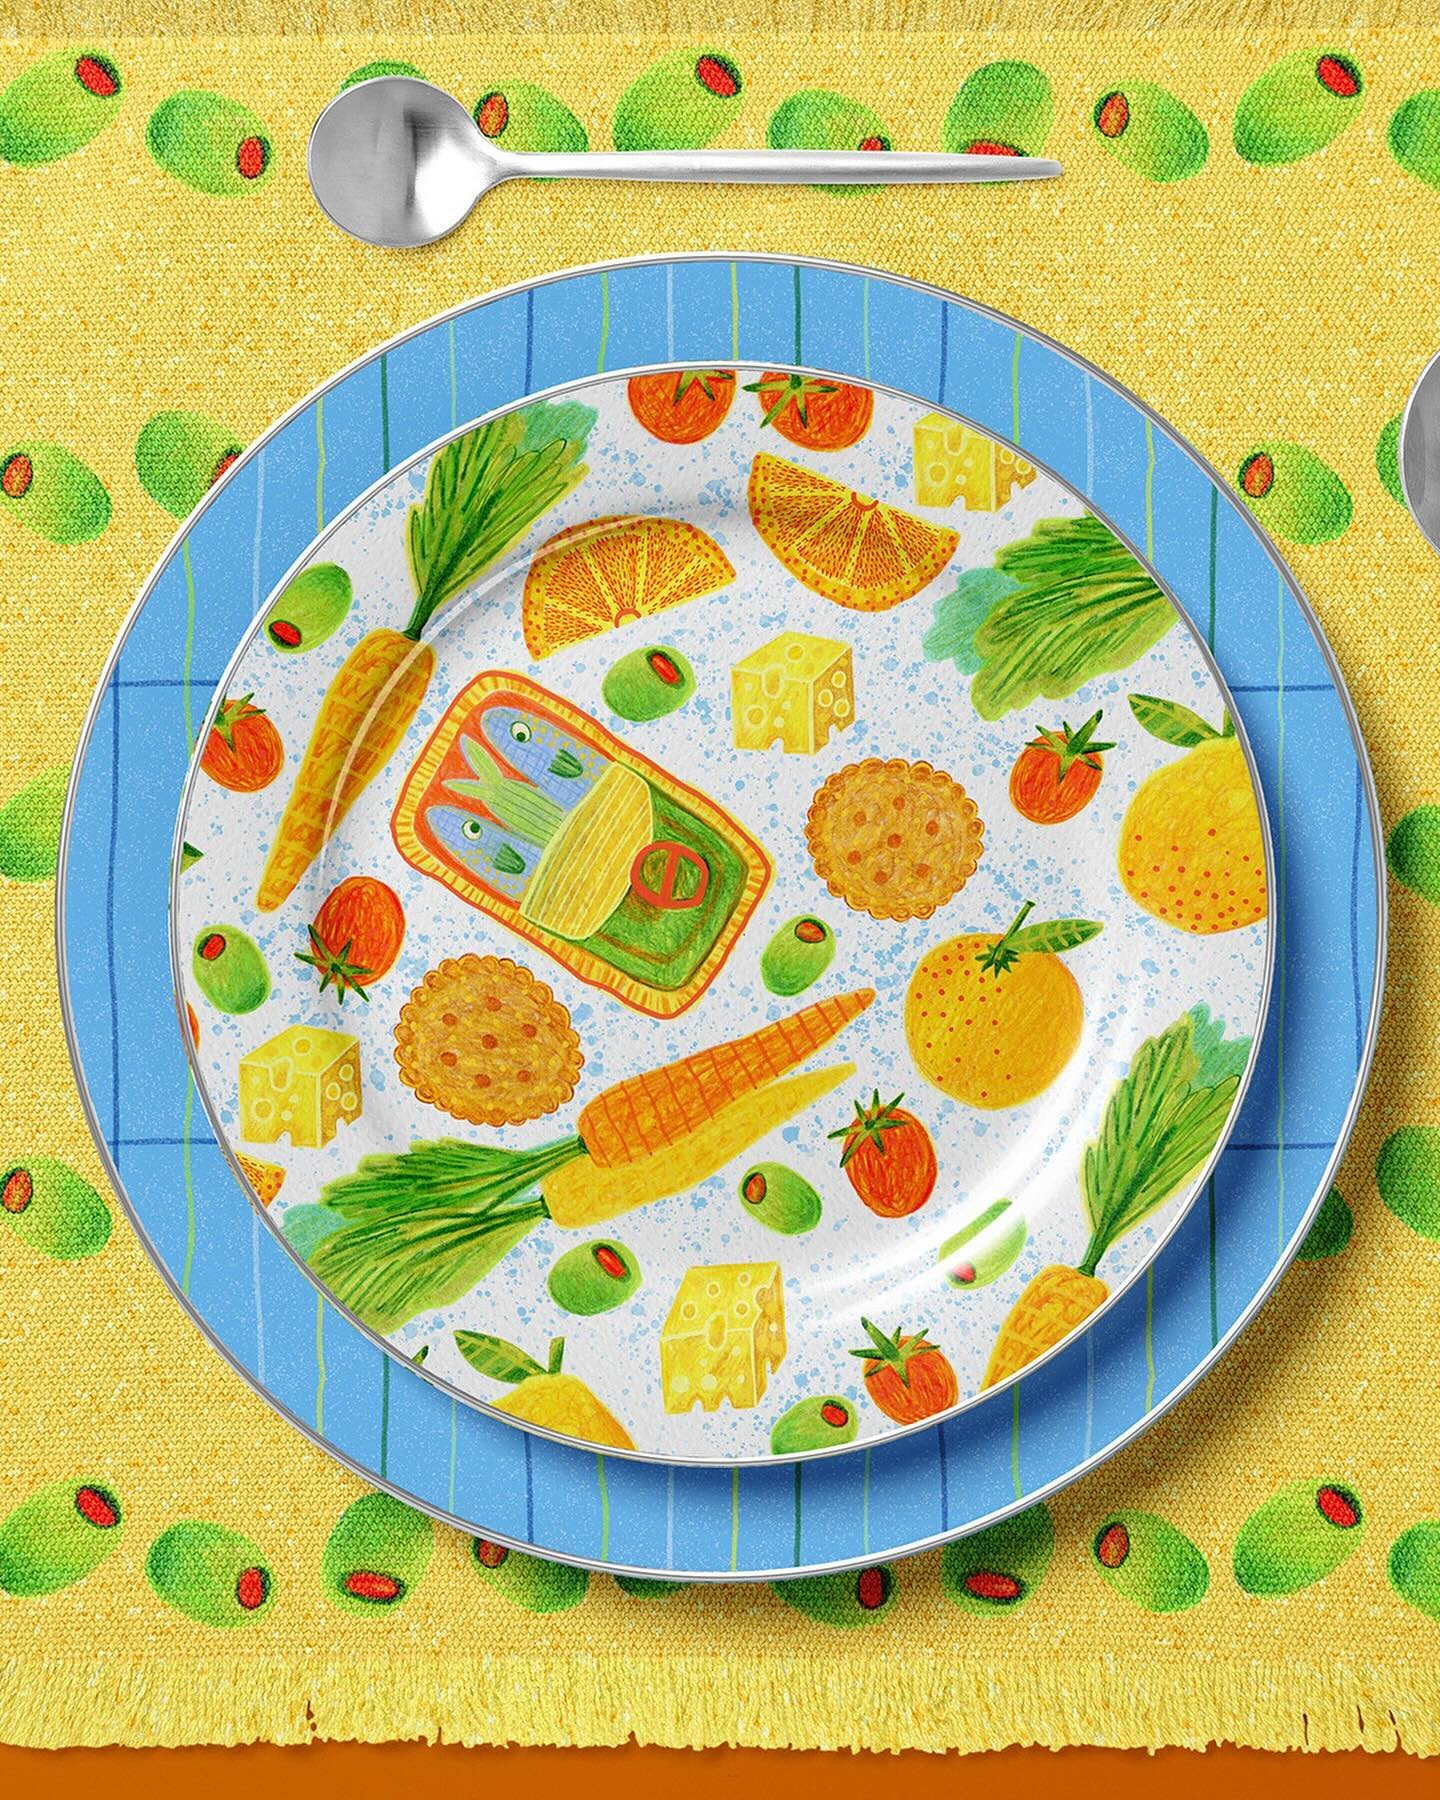 Got inspired to turn these food-themed illustrations into a dinnerware collection. Also a poll for my friends - do you eat olives like they&rsquo;re m&amp;m&rsquo;s like I do? Comment 🫒 for olive buffet and🏃&zwj;♀️ if you would rather run away.

#d